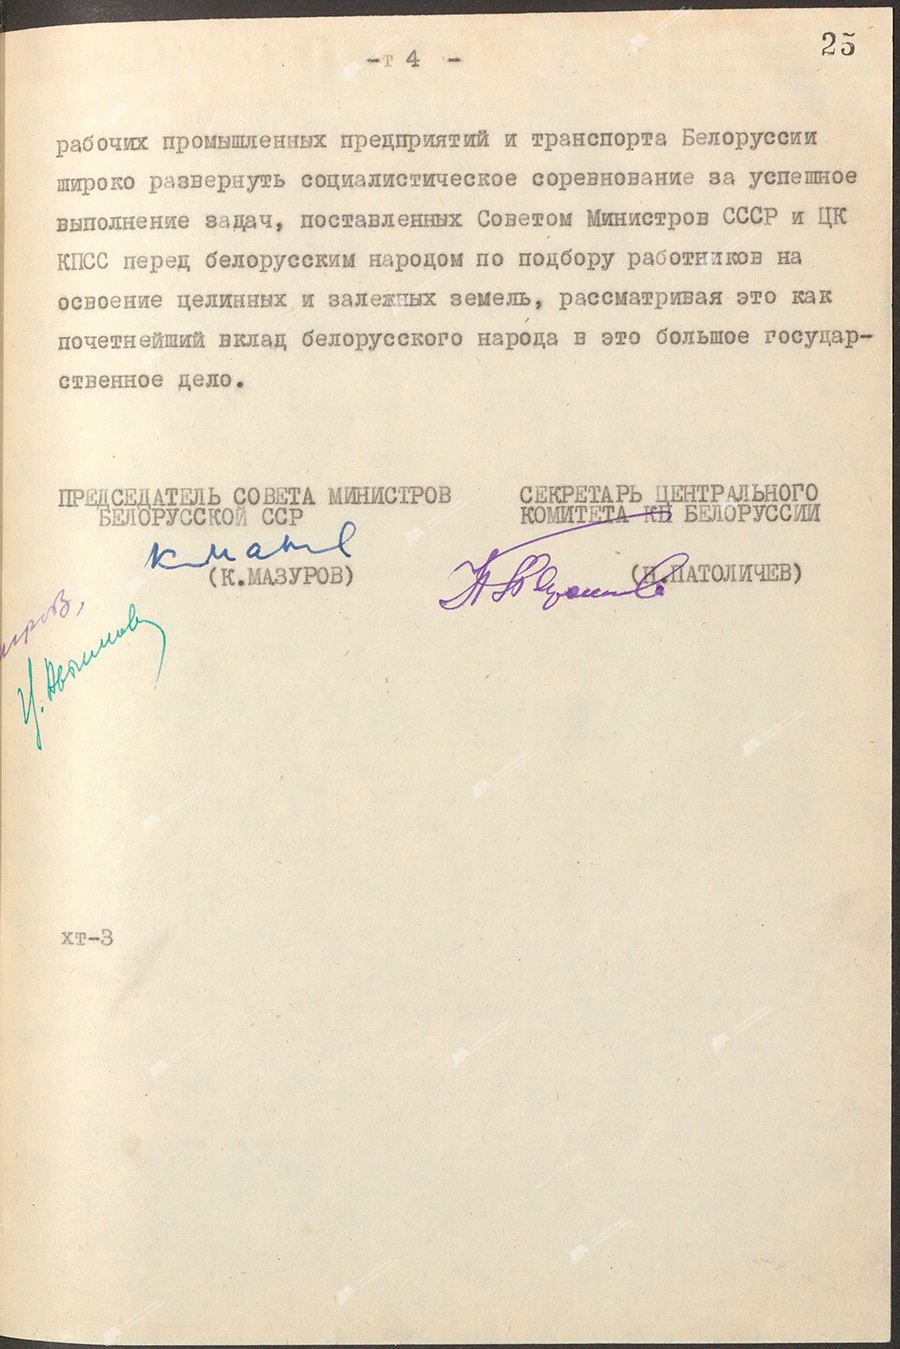 Resolution No. 5 of the Council of Ministers of the BSSR and the Central Committee of the Communist Party of Belarus «On the selection and assignment of workers, engineering and technical workers and employees to work in MTS and state farms in the areas of development of virgin and fallow lands of the RSFSR and Kazakhstan»-с. 3